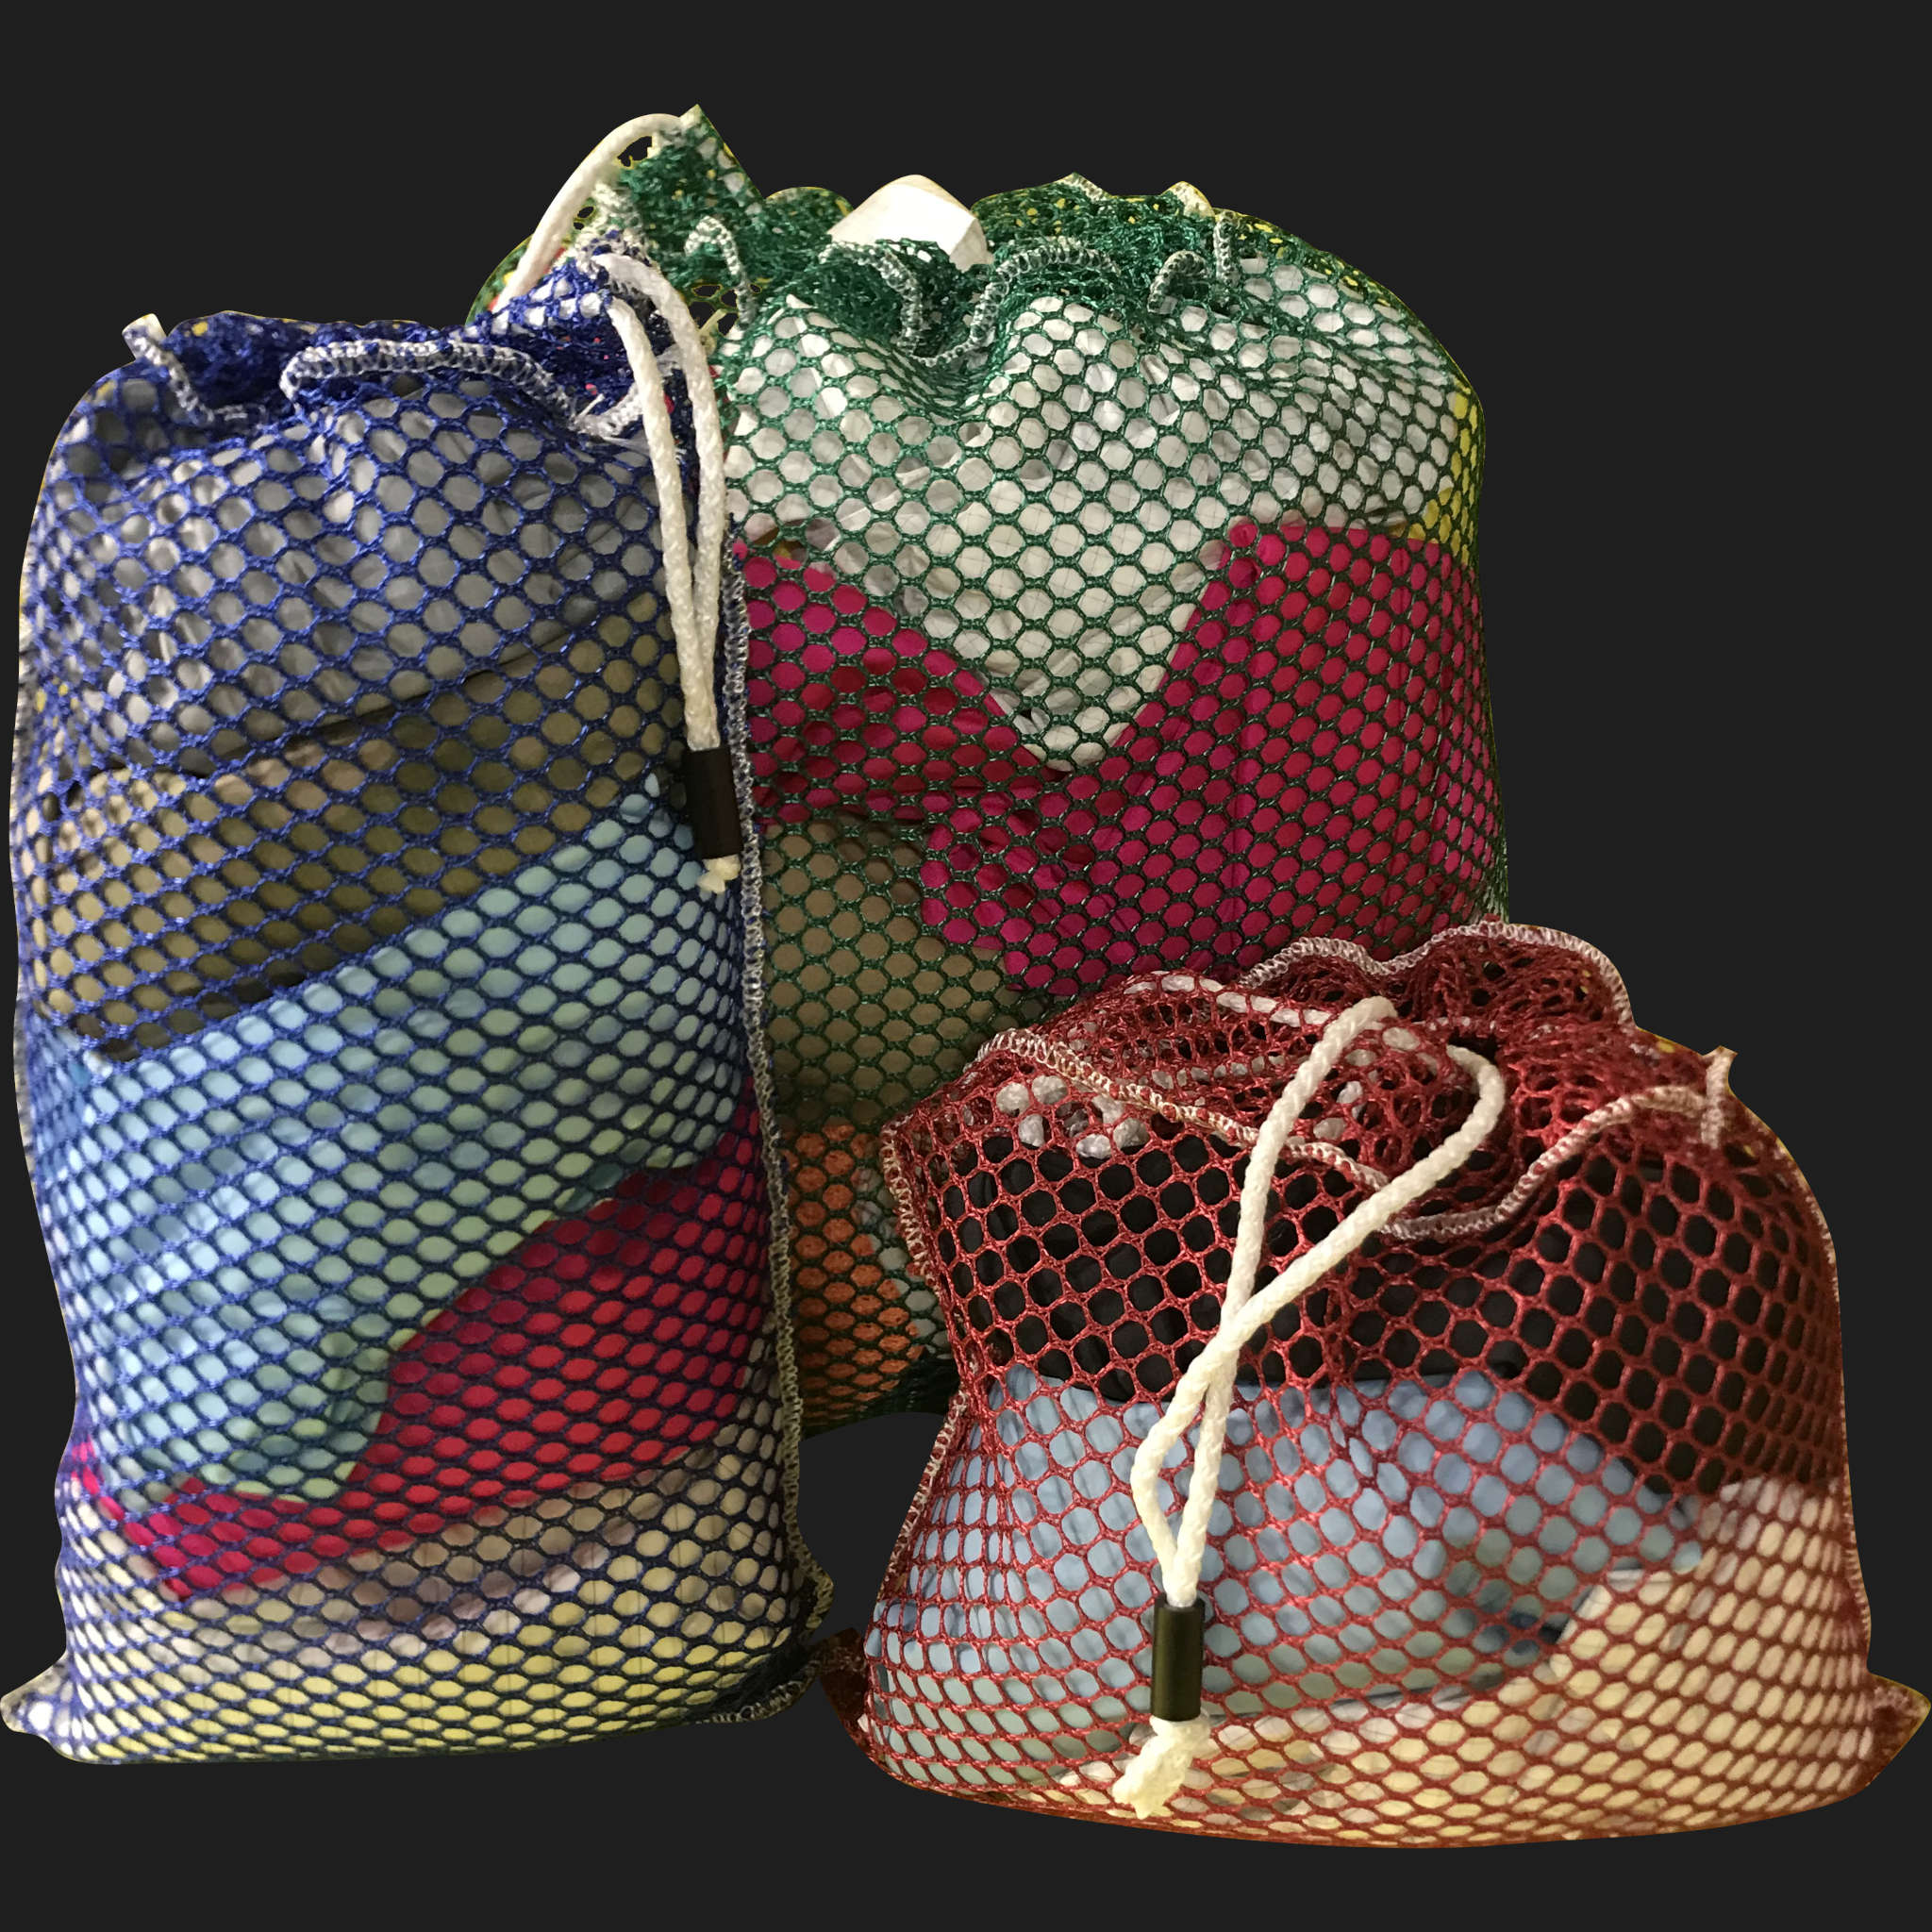 52" x 58" Customized Mesh-Net-Laundry Bags Heavy Duty with Cord and barrellock closure